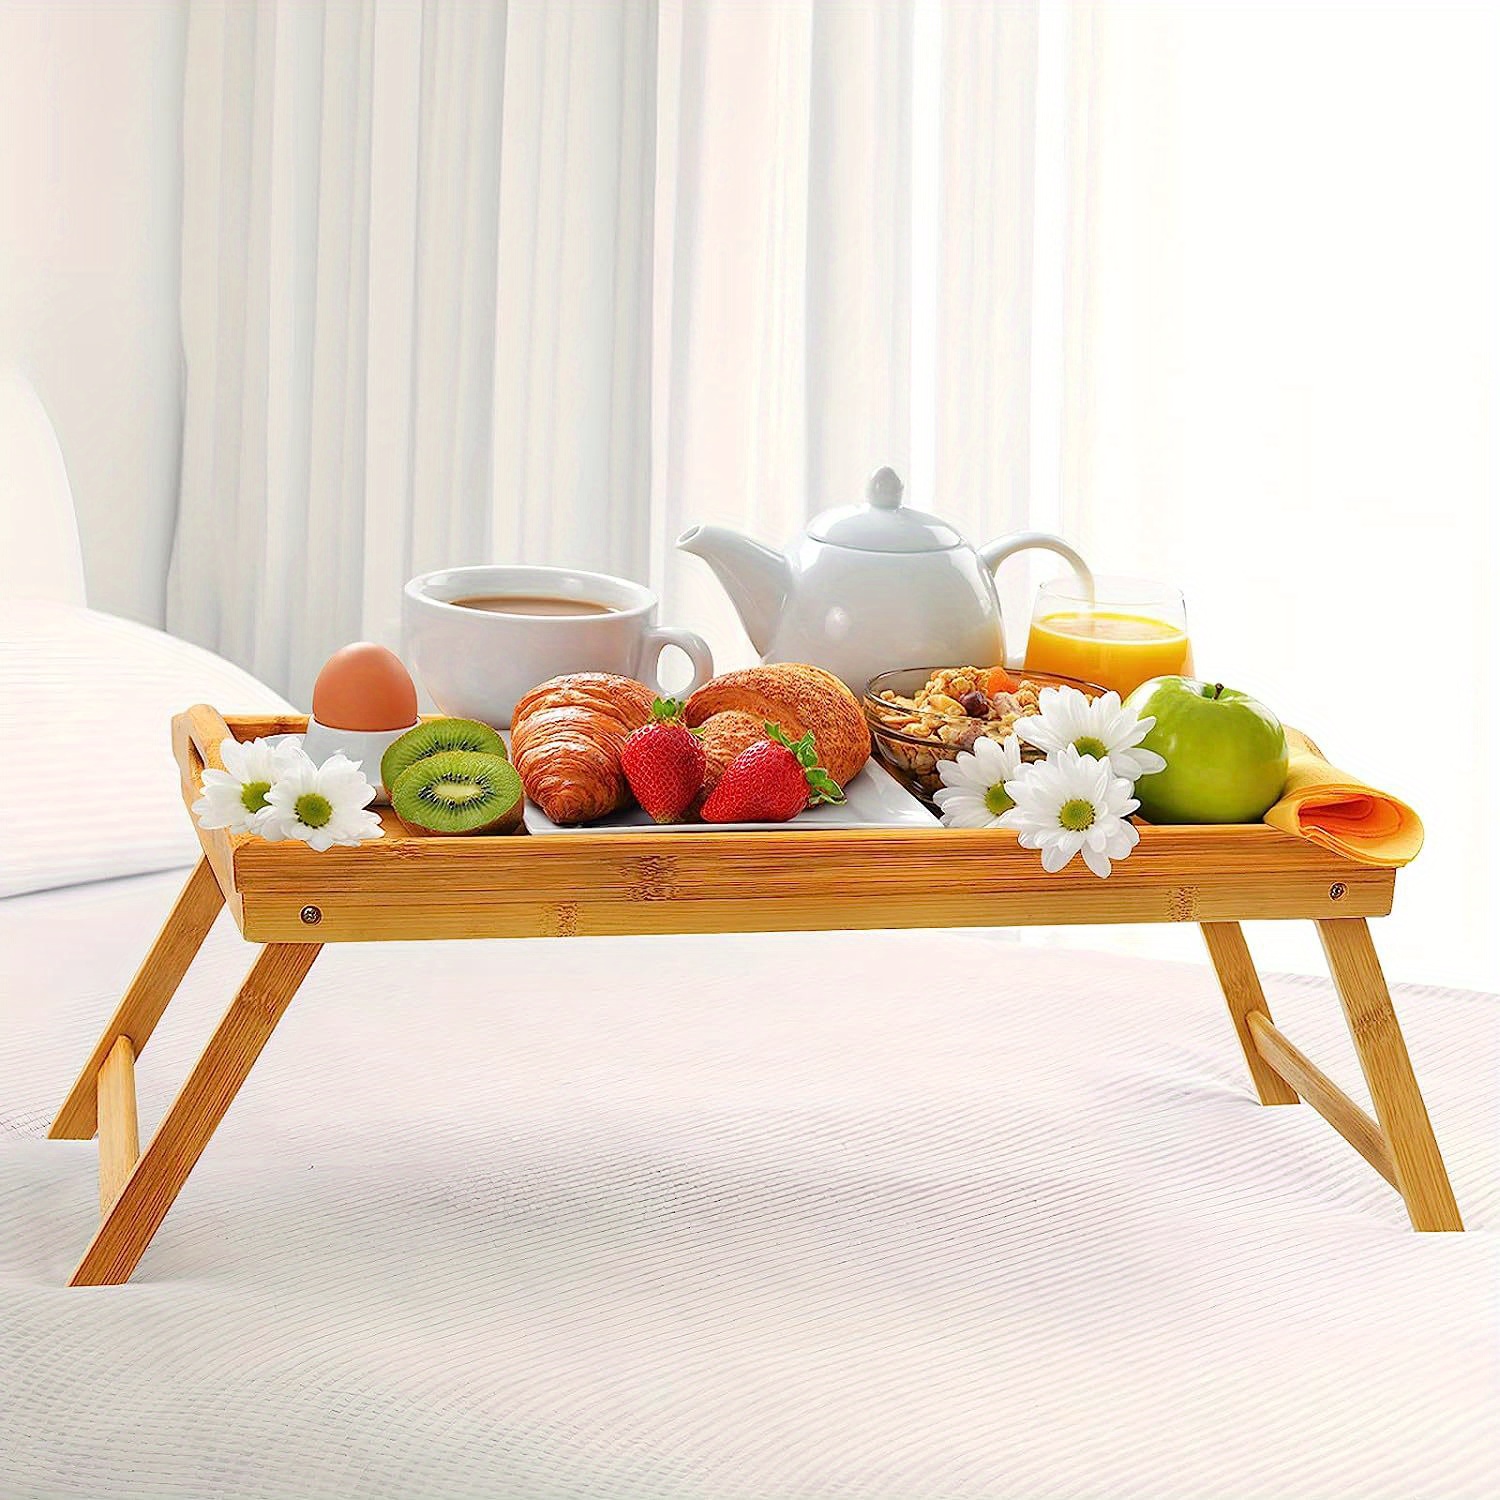 Sgigiul Bamboo Dinner Food Trays For Eating On Couch Party P